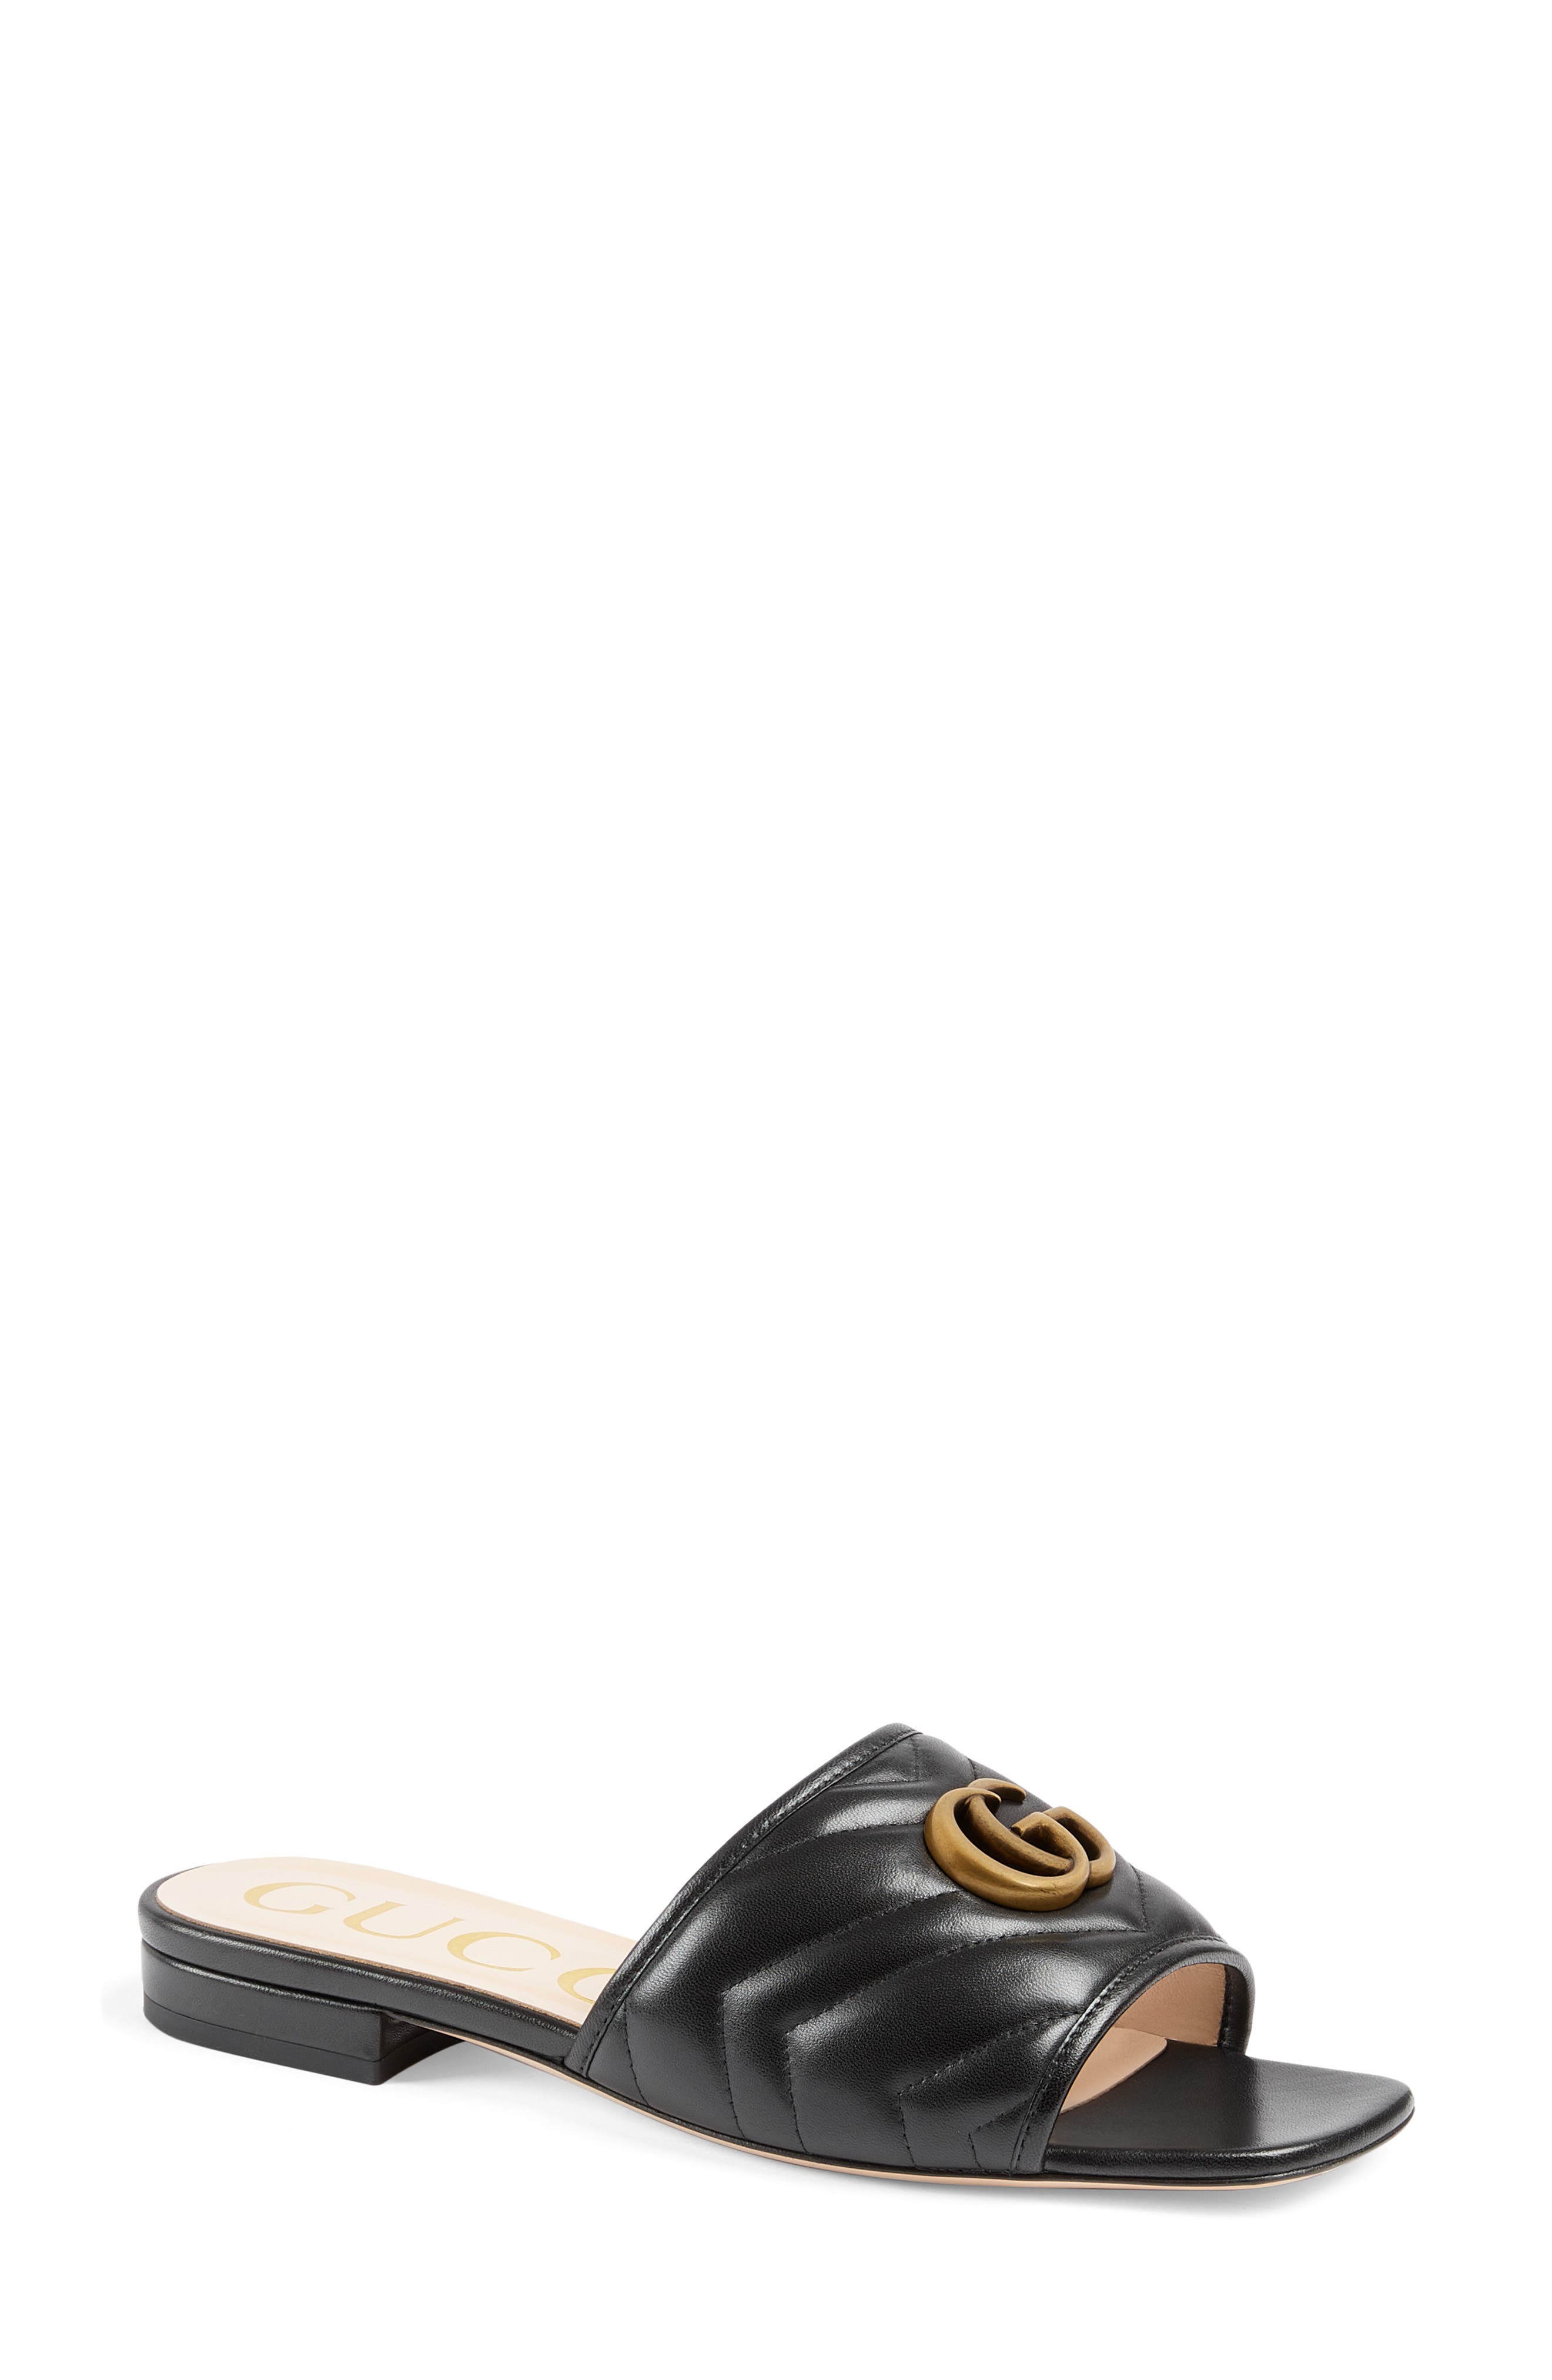 nordstrom gucci slippers